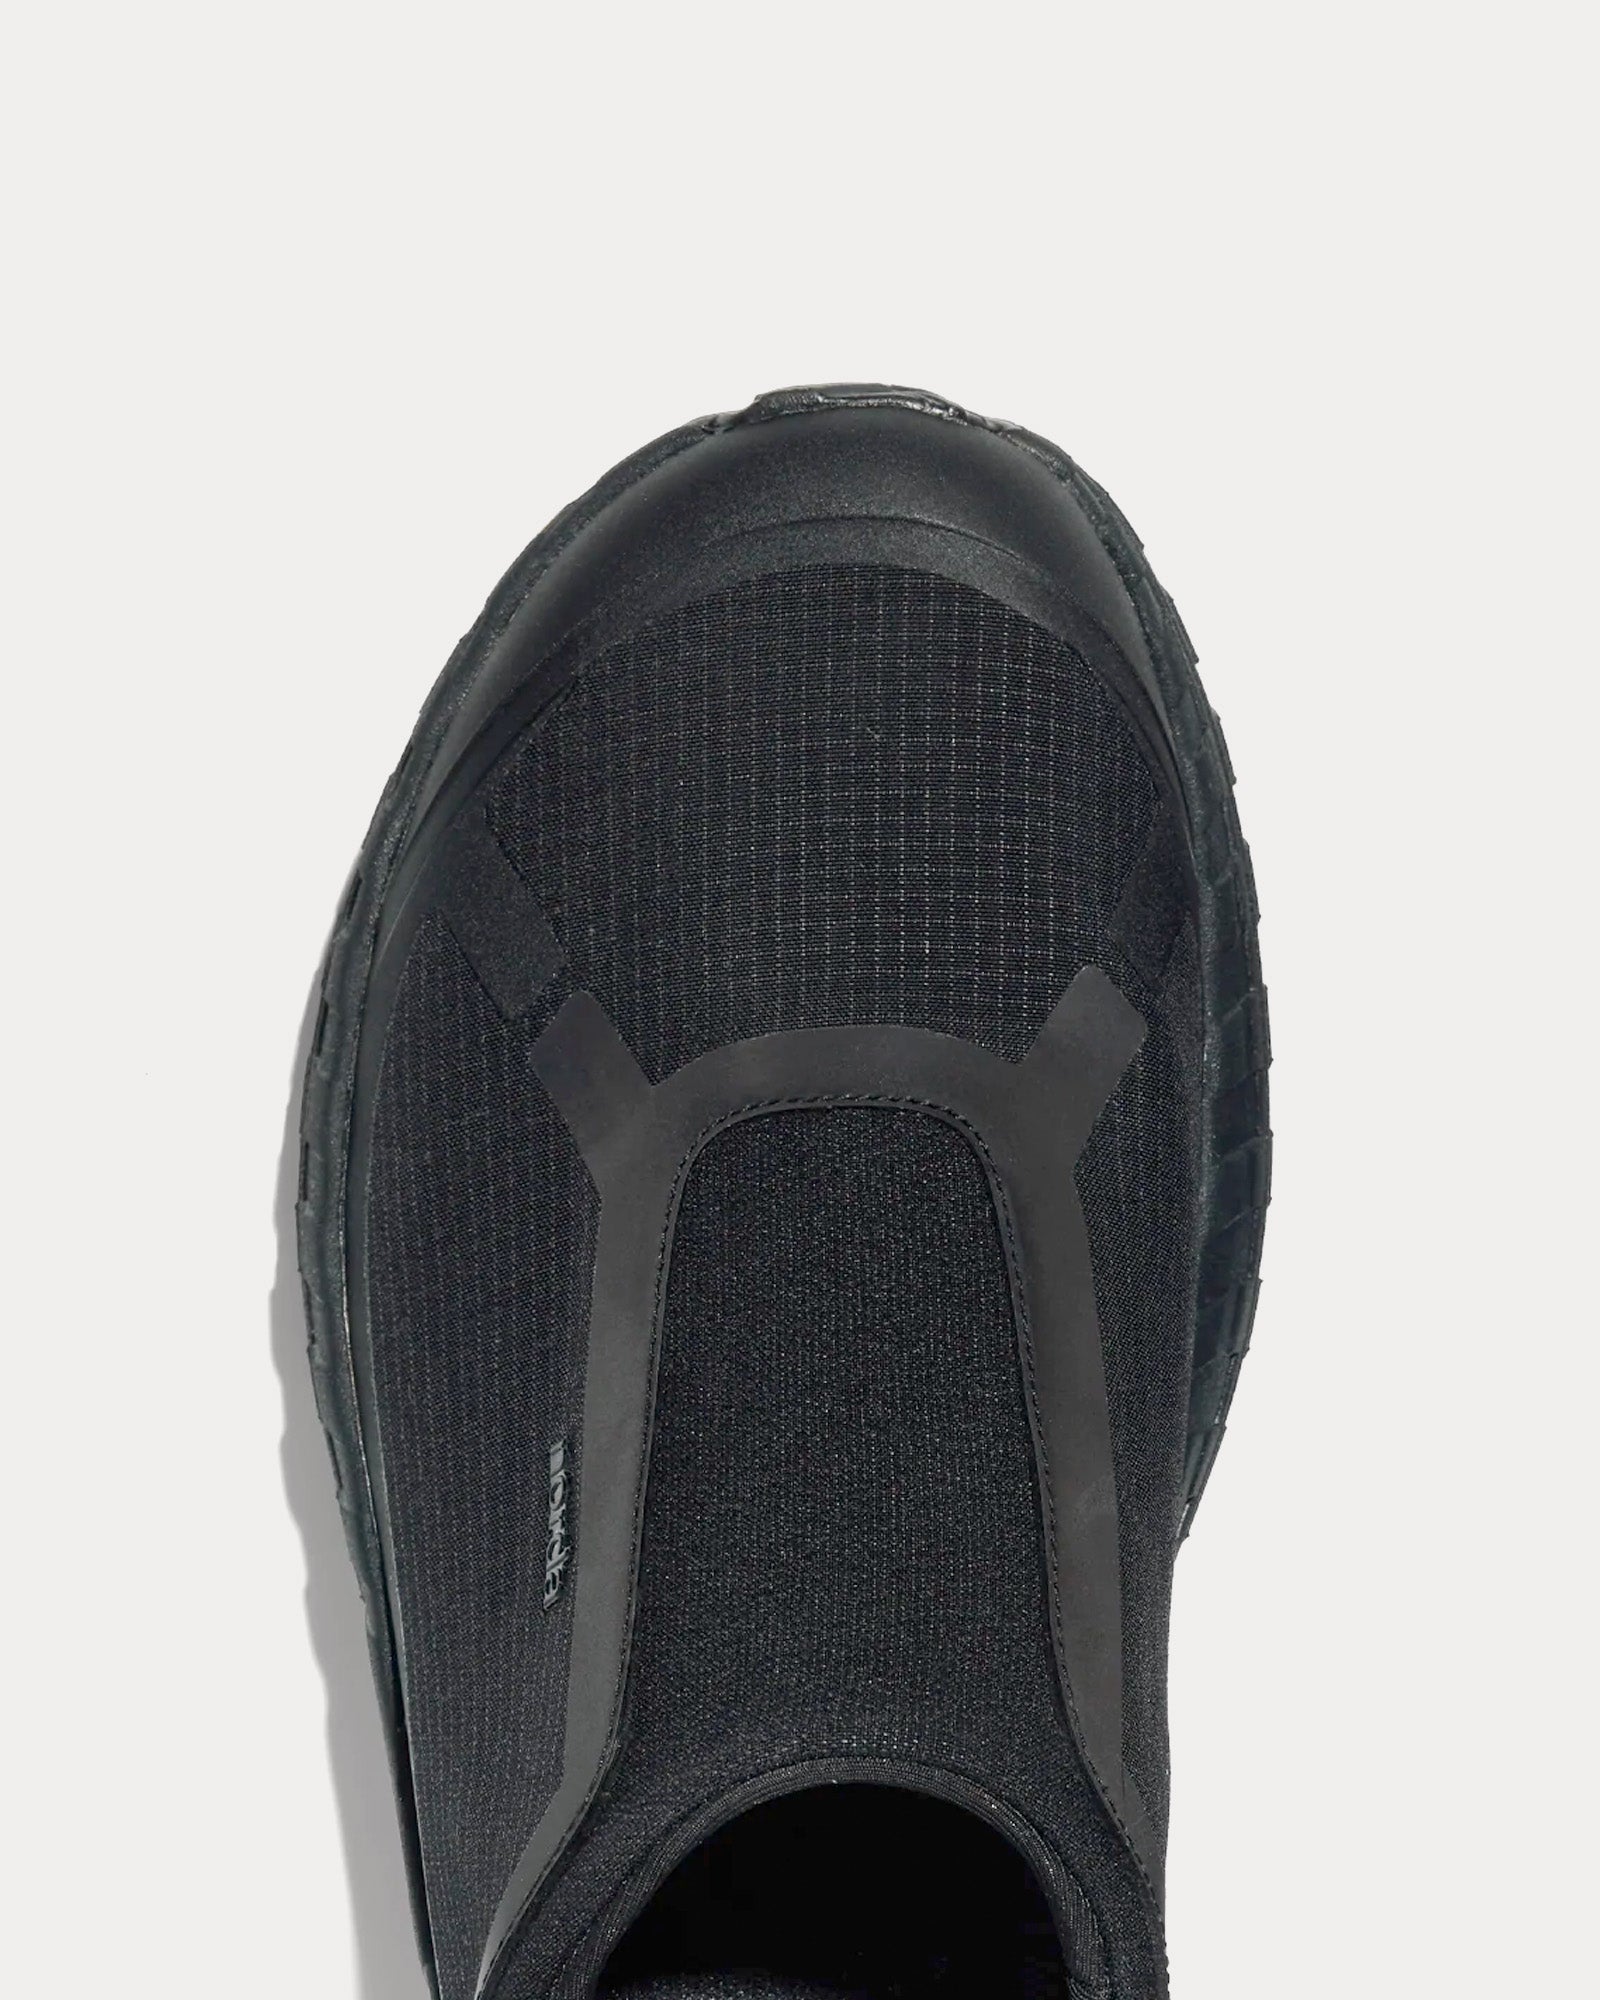 Norda - 003 W Pitch Black Running Shoes